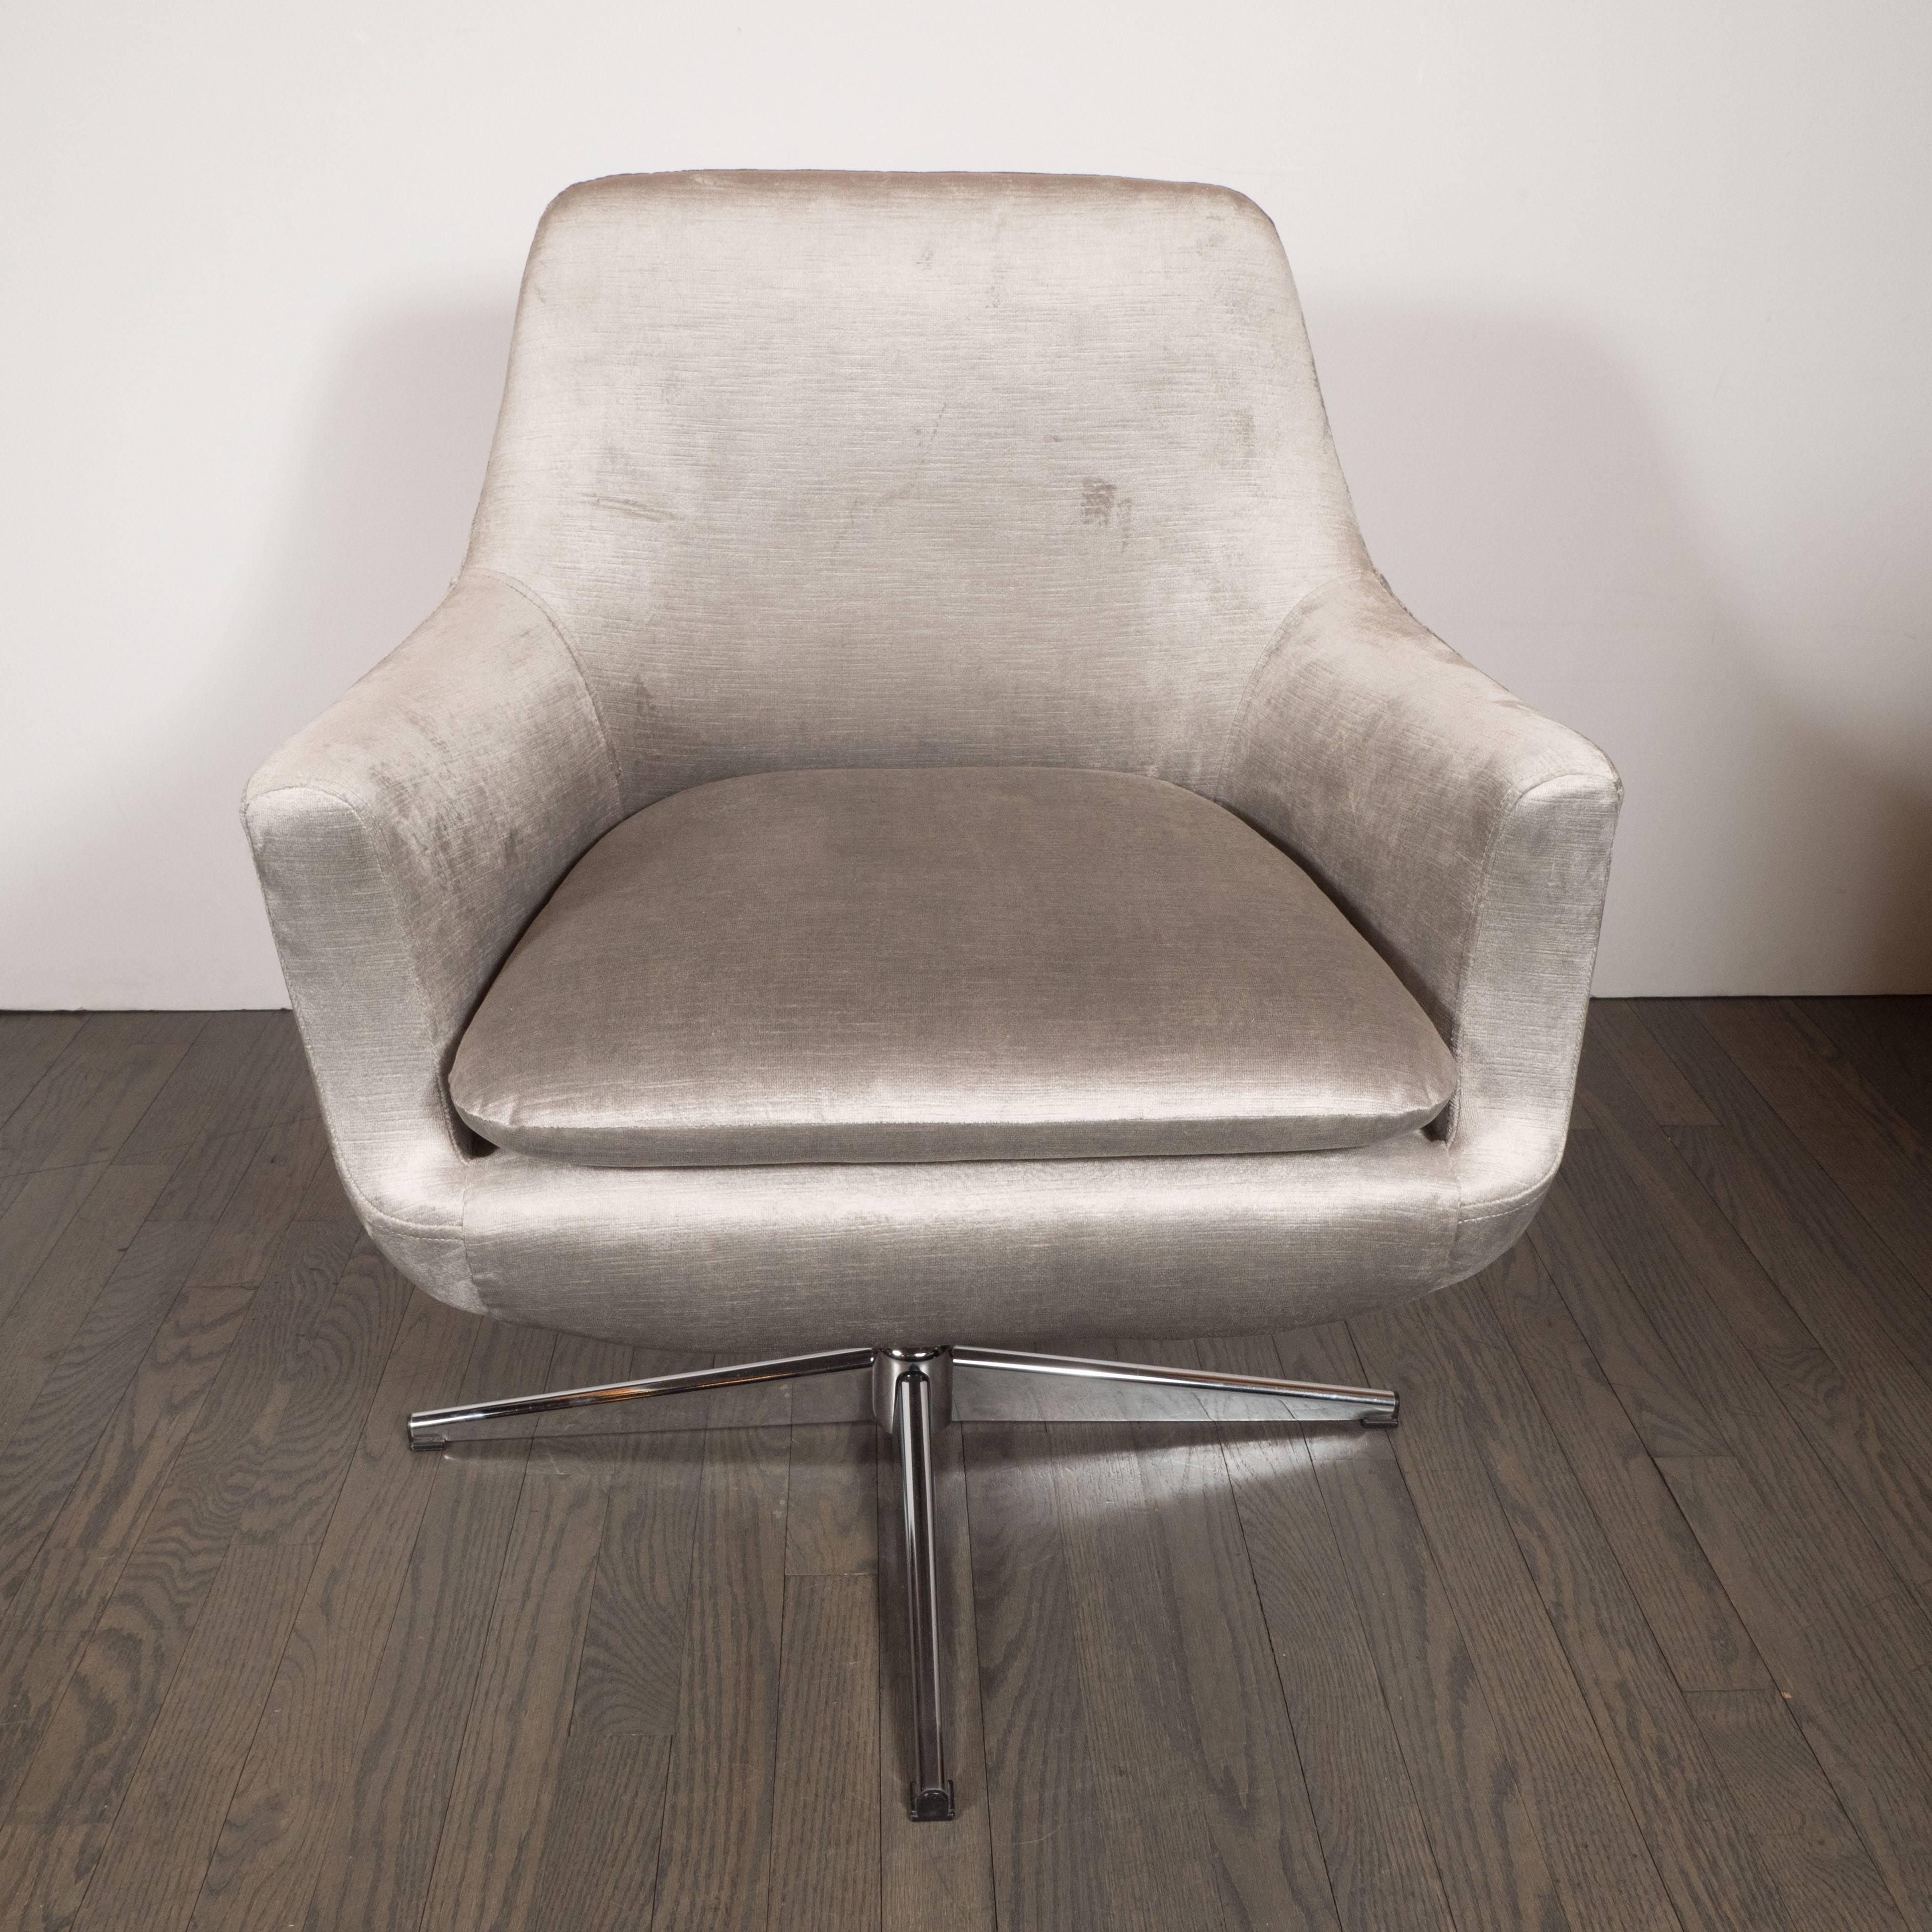 This refined pair of Mid-Century Modern sculptural swivel chairs were realized in the United States, circa 1970. They feature an X-form base in polished chrome; sloping arms; a rectangular back with rounded corners; and a detachable seat cushion.